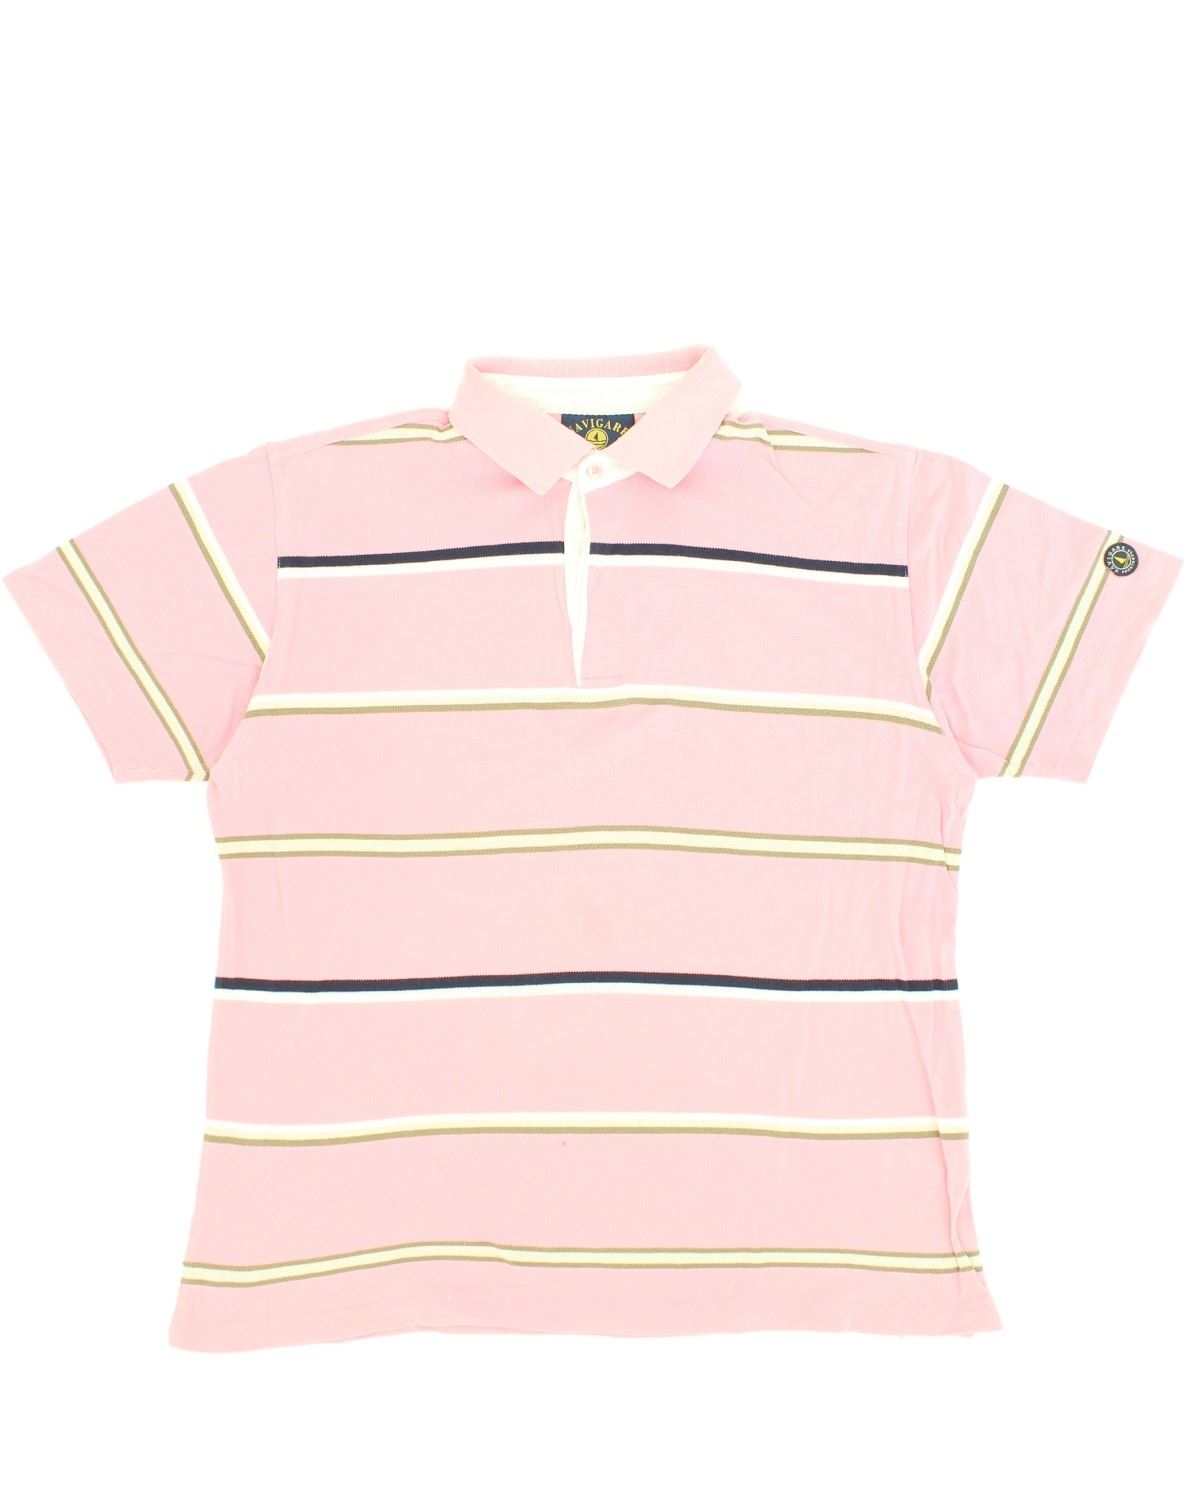 Mens Polo Shirt XL Pink Striped Cotton | Vintage & Second-Hand Clothing Online | Thrift Shop